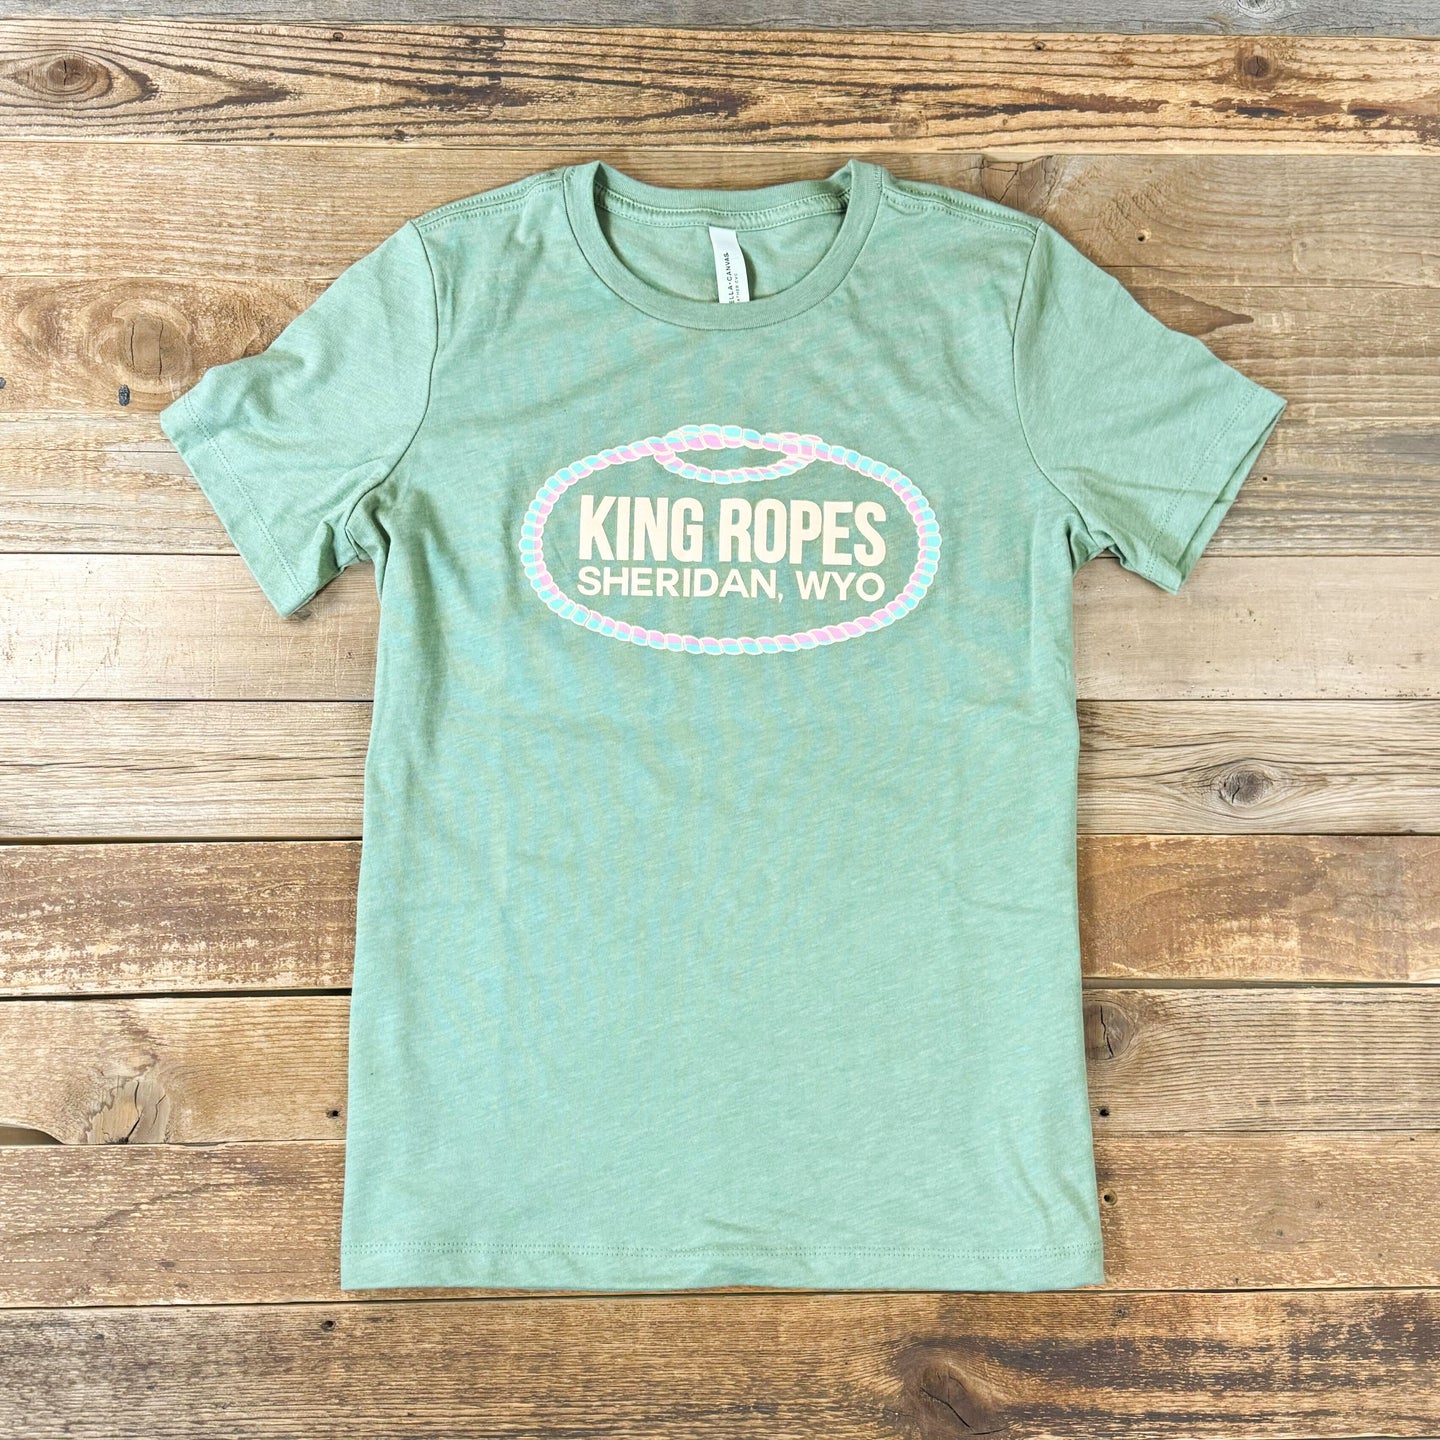 NEW! Women's King Ropes Tee - Heather Sage